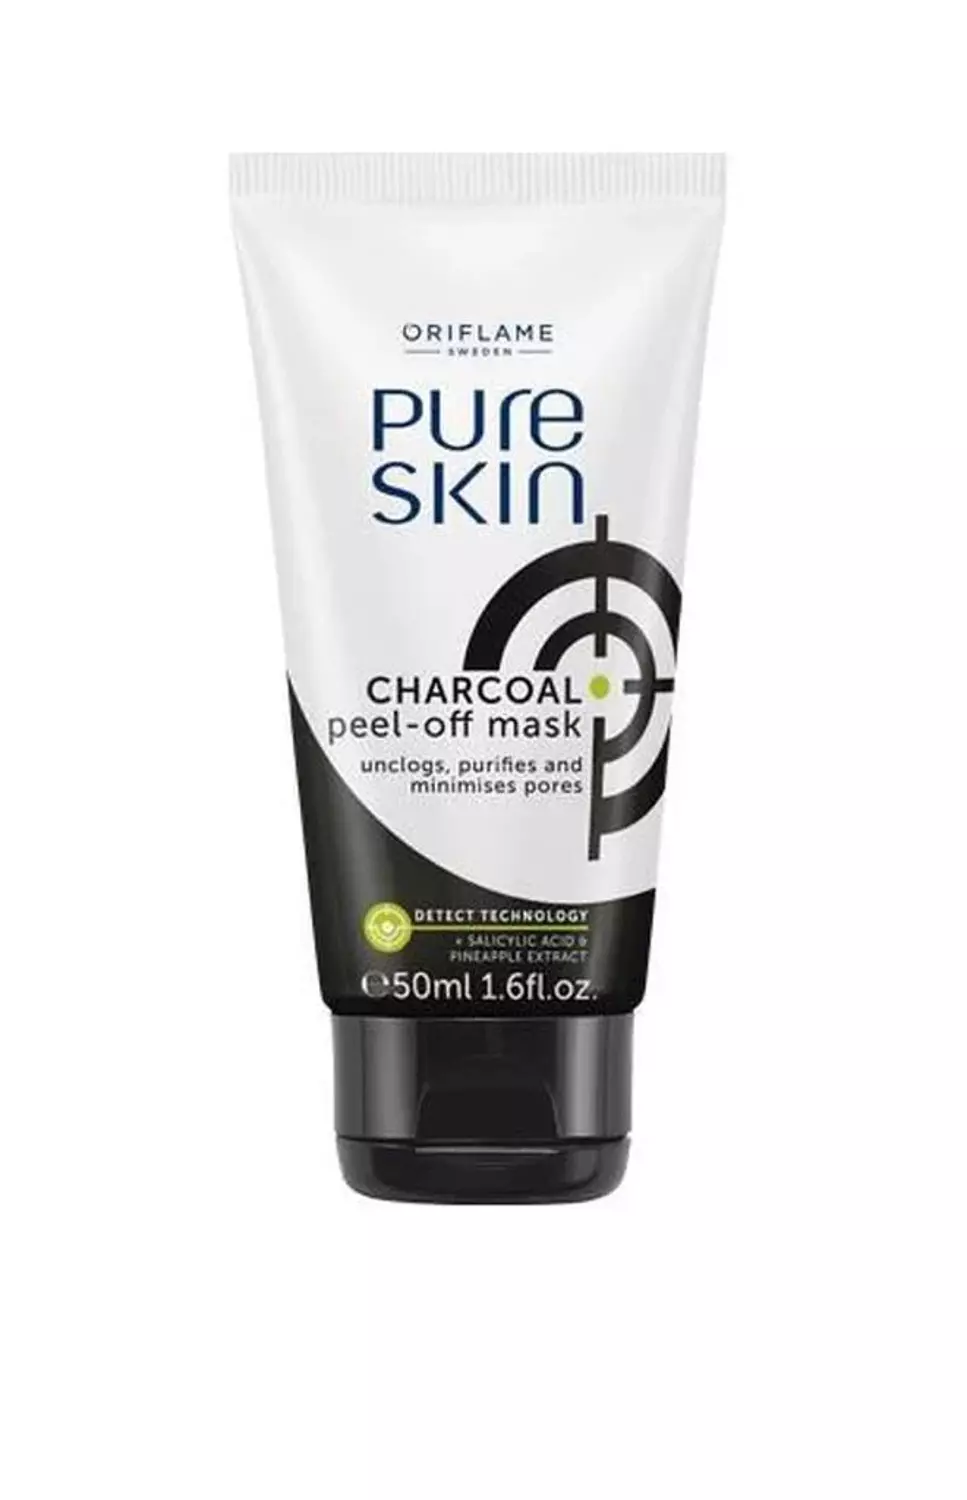 Pure Skin Charcoal Peel-off Mask hover image